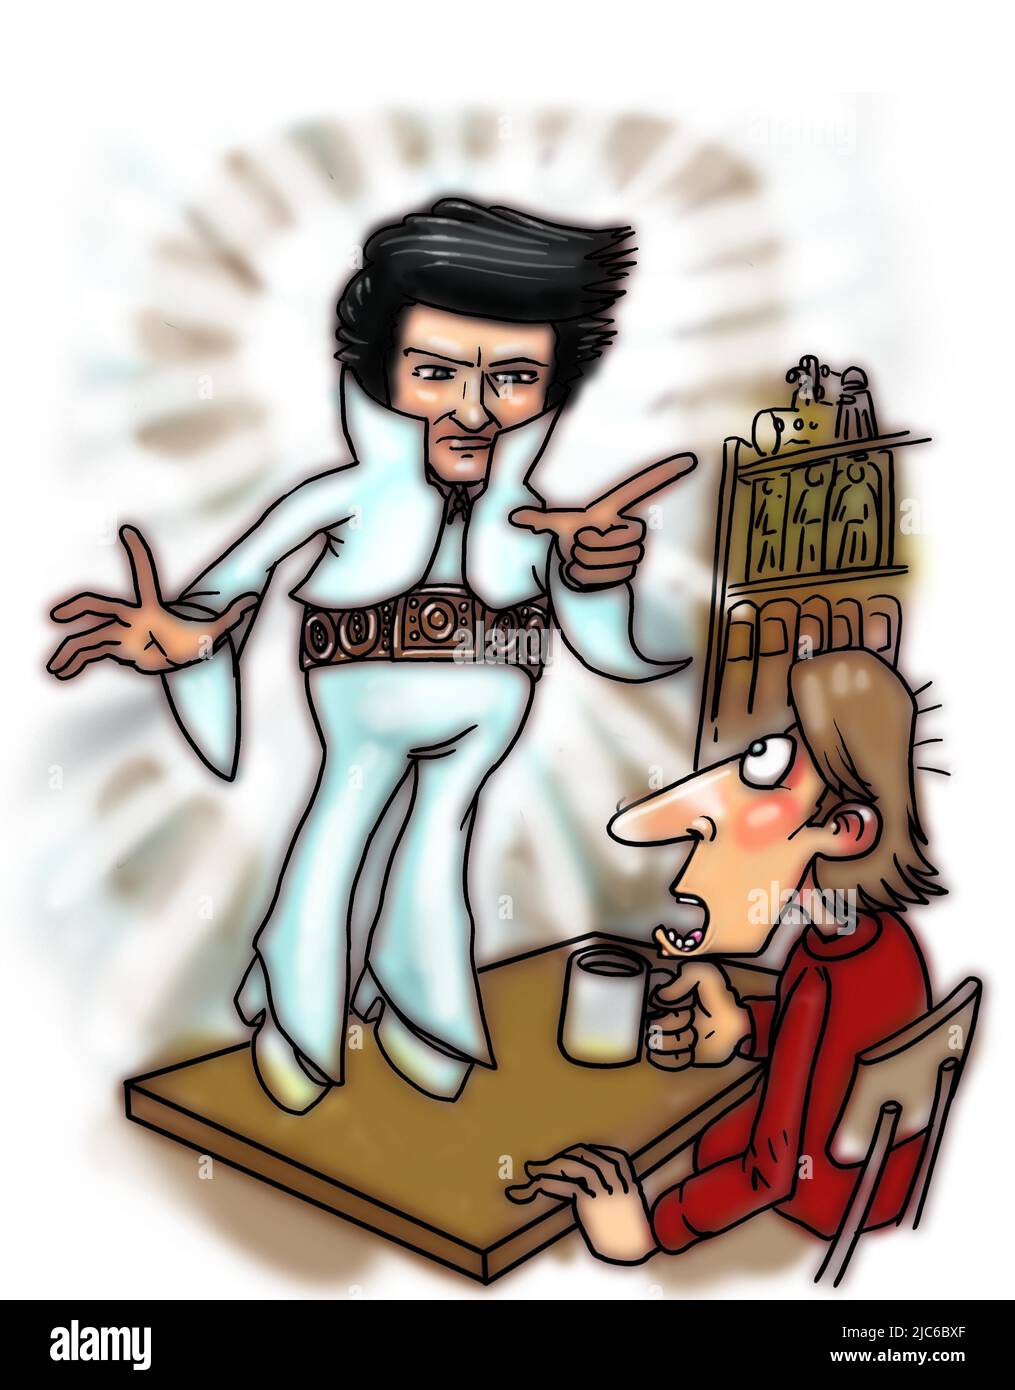 Funny cartoon, man is surprised by ghost of Elvis, illustrating his enduring popularity or virtual concerts gigs by holograms of dead musicians groups Stock Photo